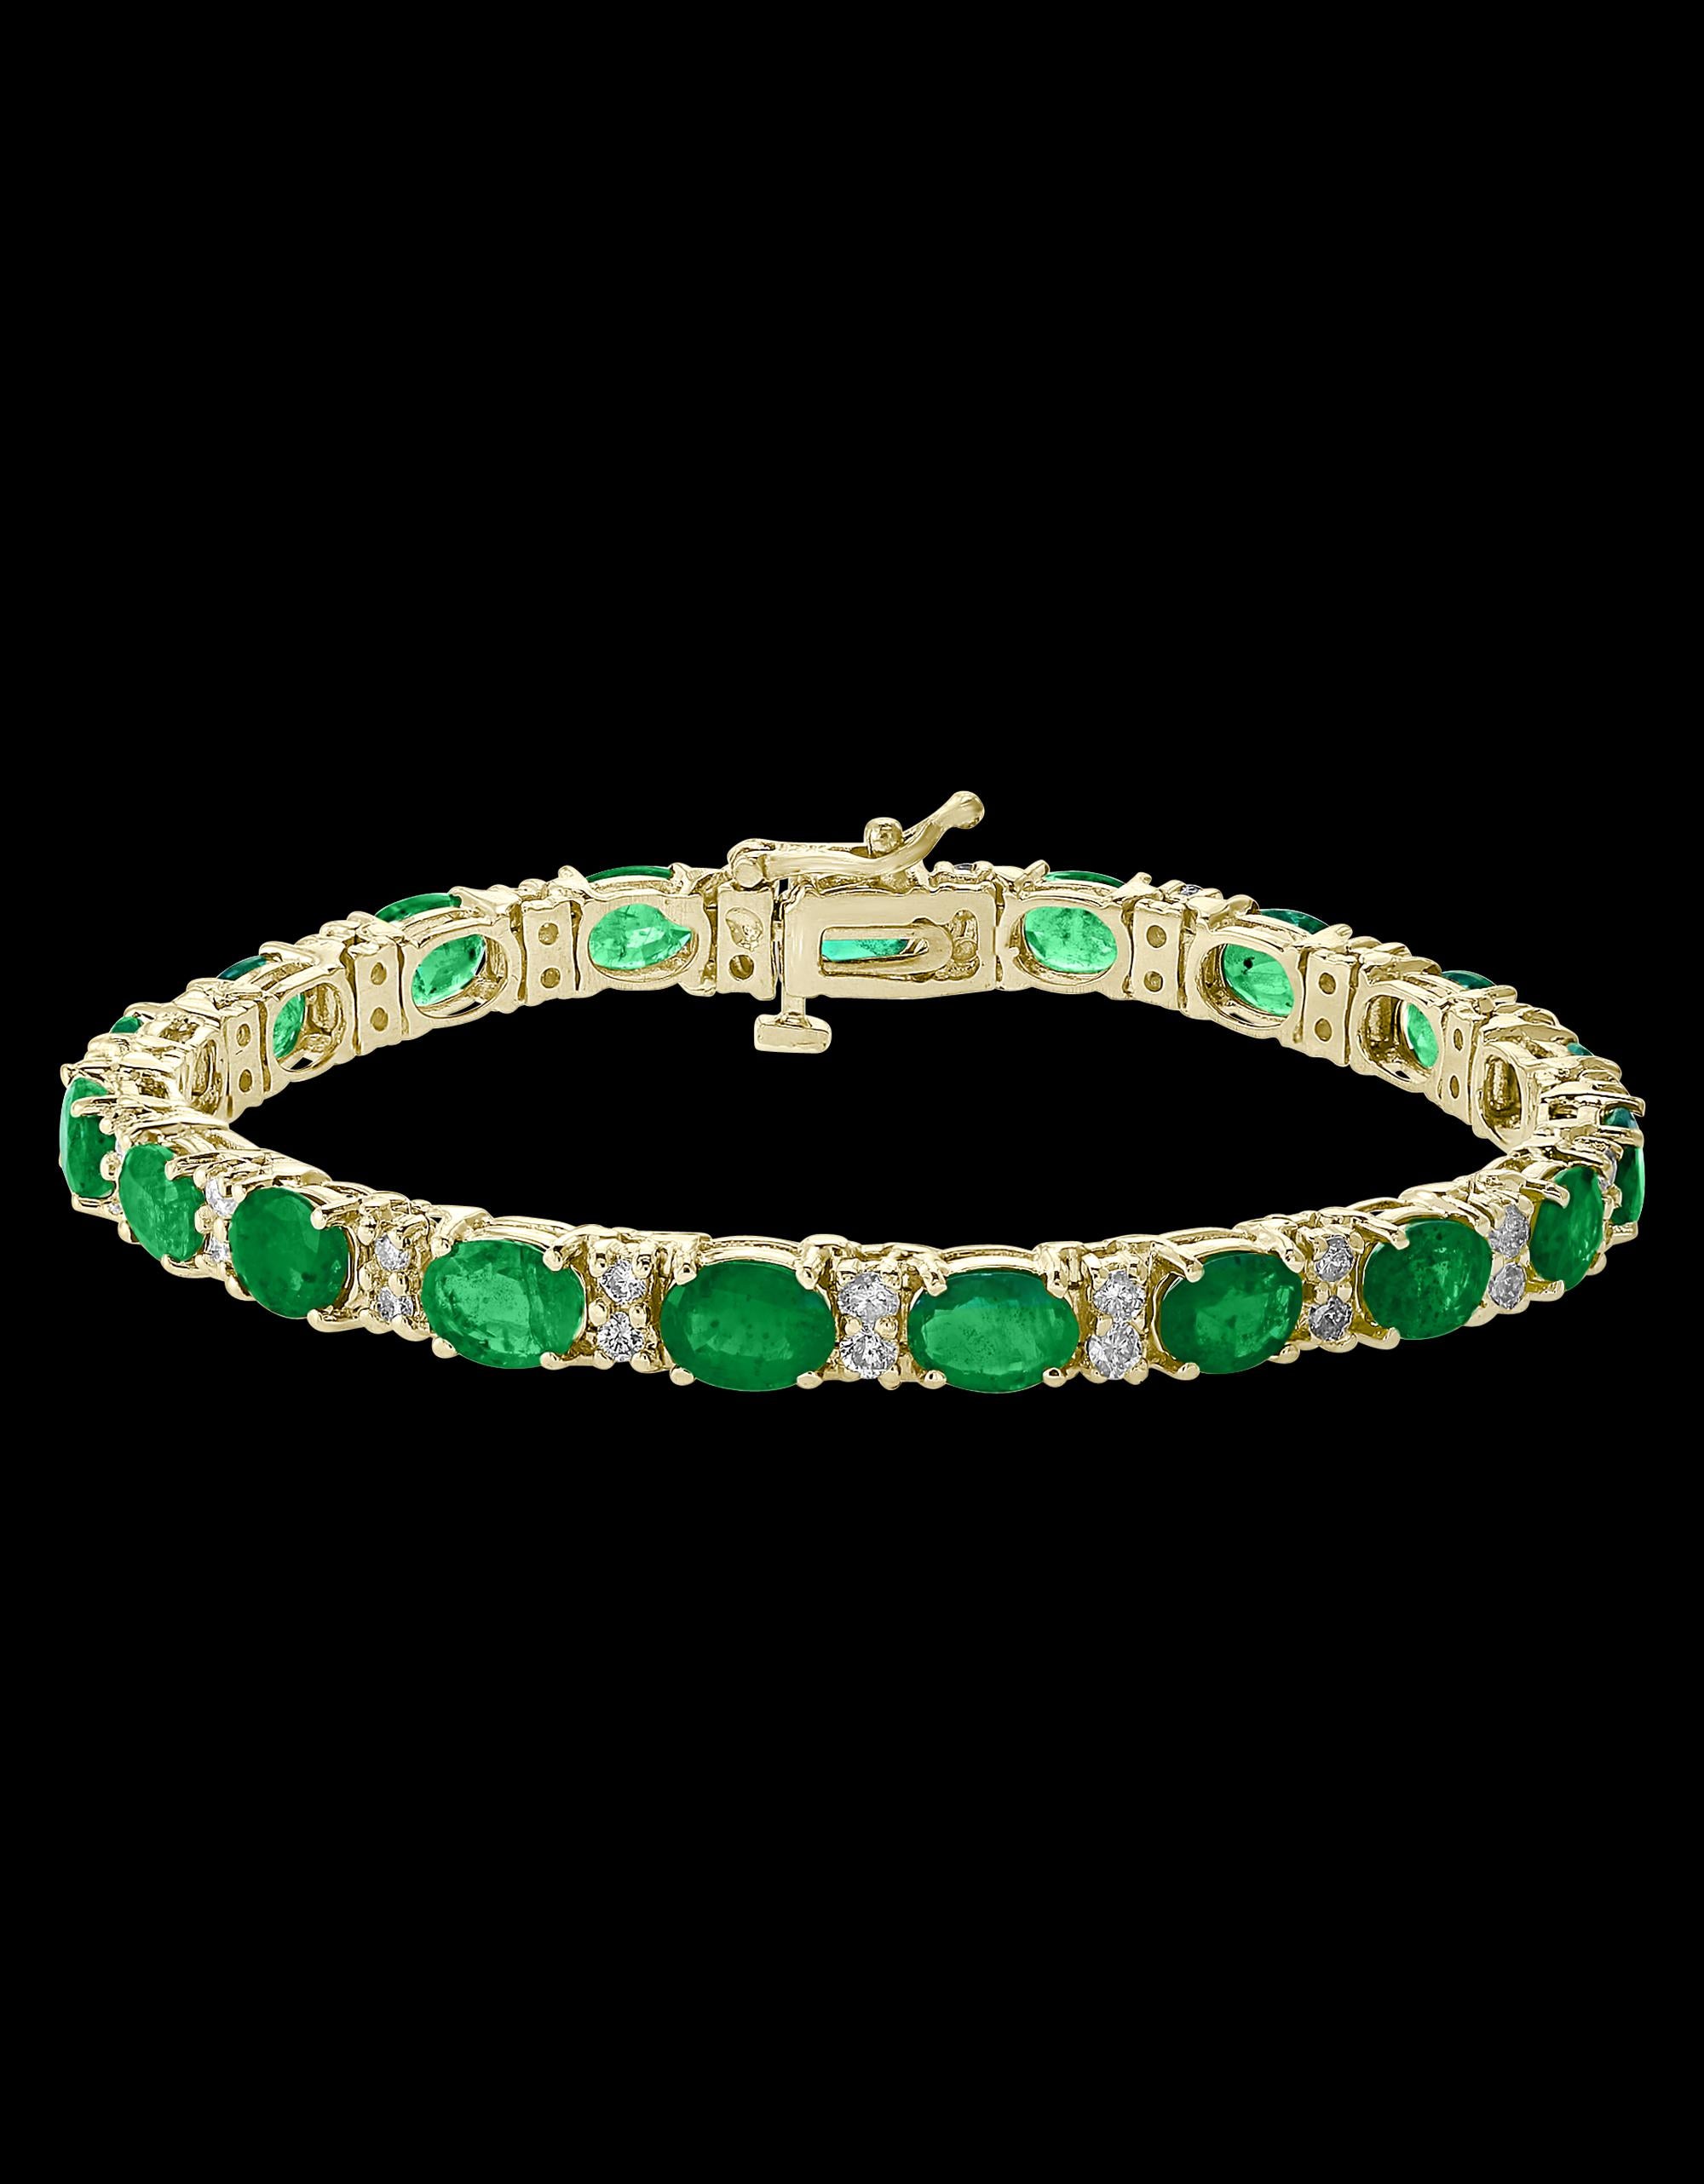  This exceptionally affordable Tennis  bracelet has  16 large natural stones of oval  Emeralds  . Each Emerald is spaced by two diamonds . Total weight of the Emeralds is 20 + carat. Total number of diamonds are 32 and diamond weighs 1.6